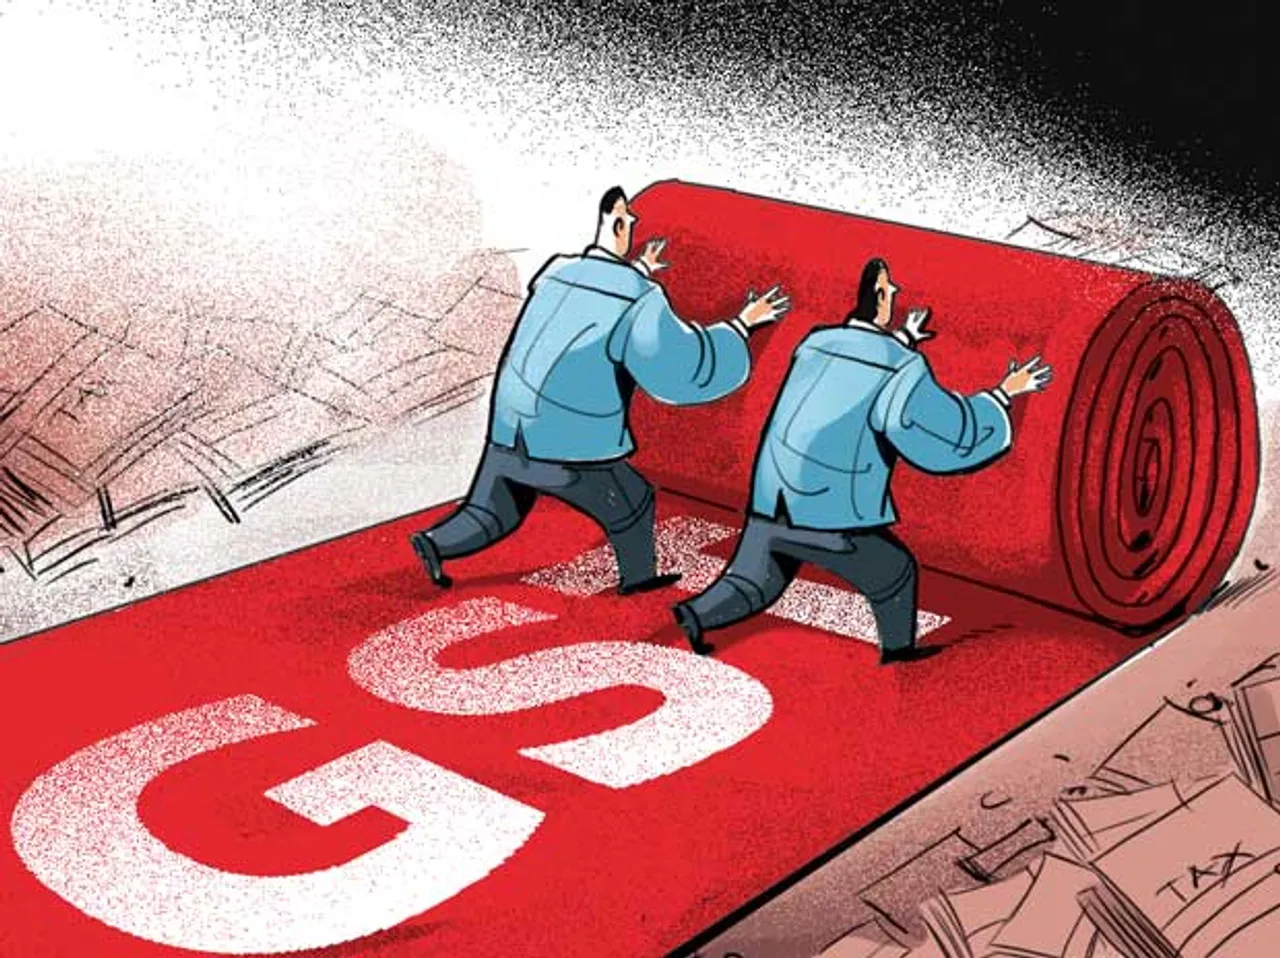 GST should not stand for Gory, Sloppy and Tricky. But how?